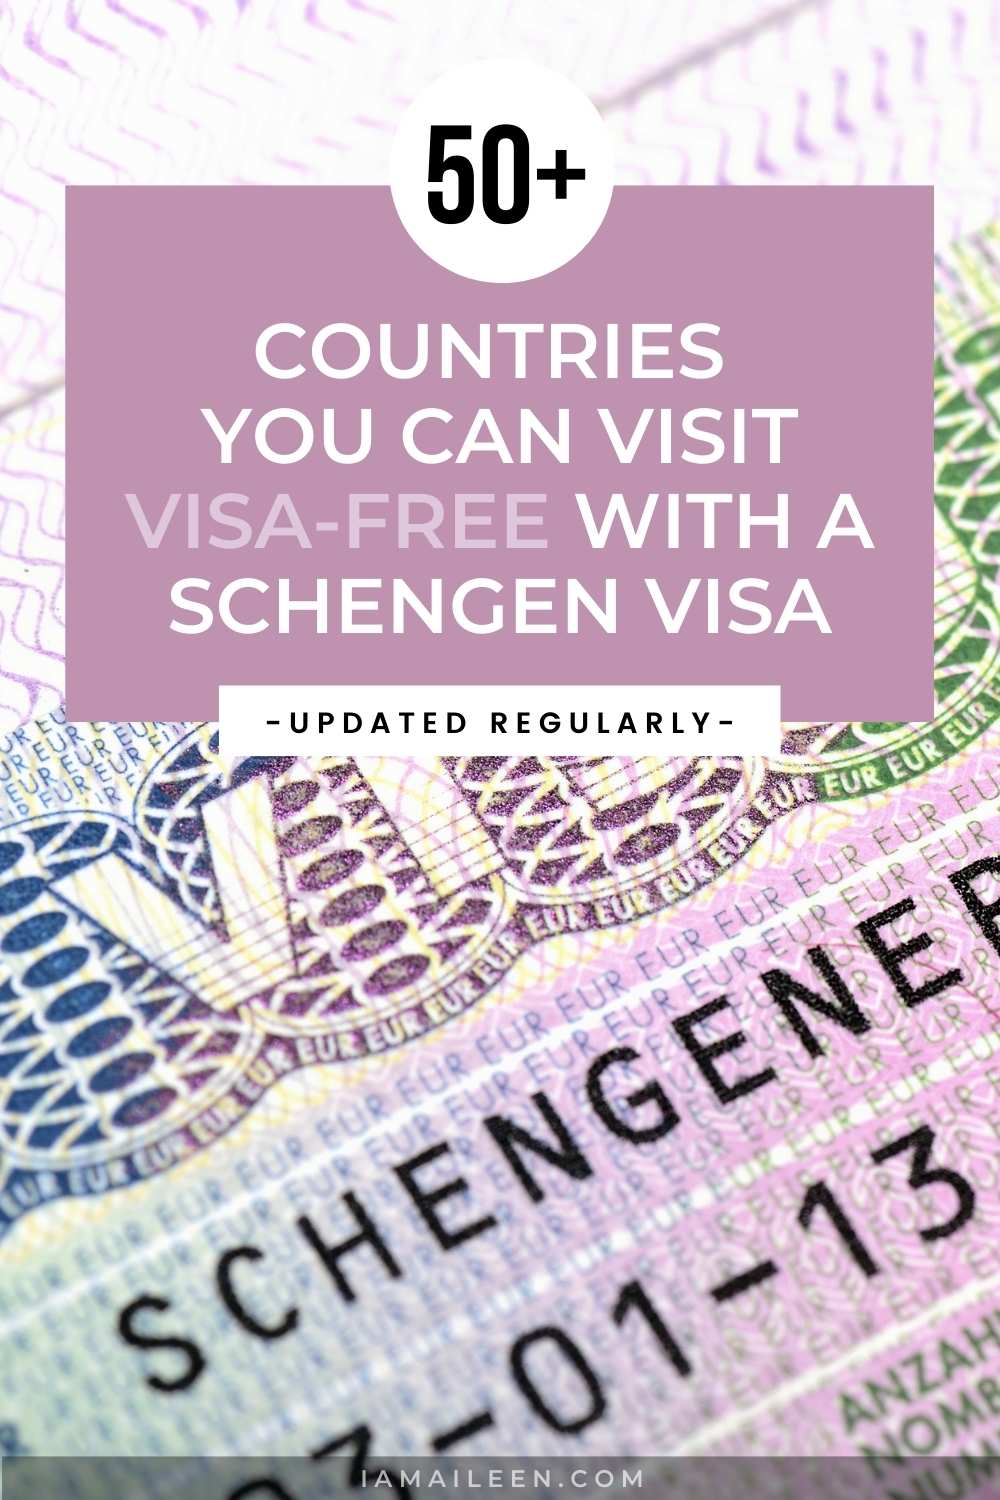 Countries you can visit with a Schengen visa